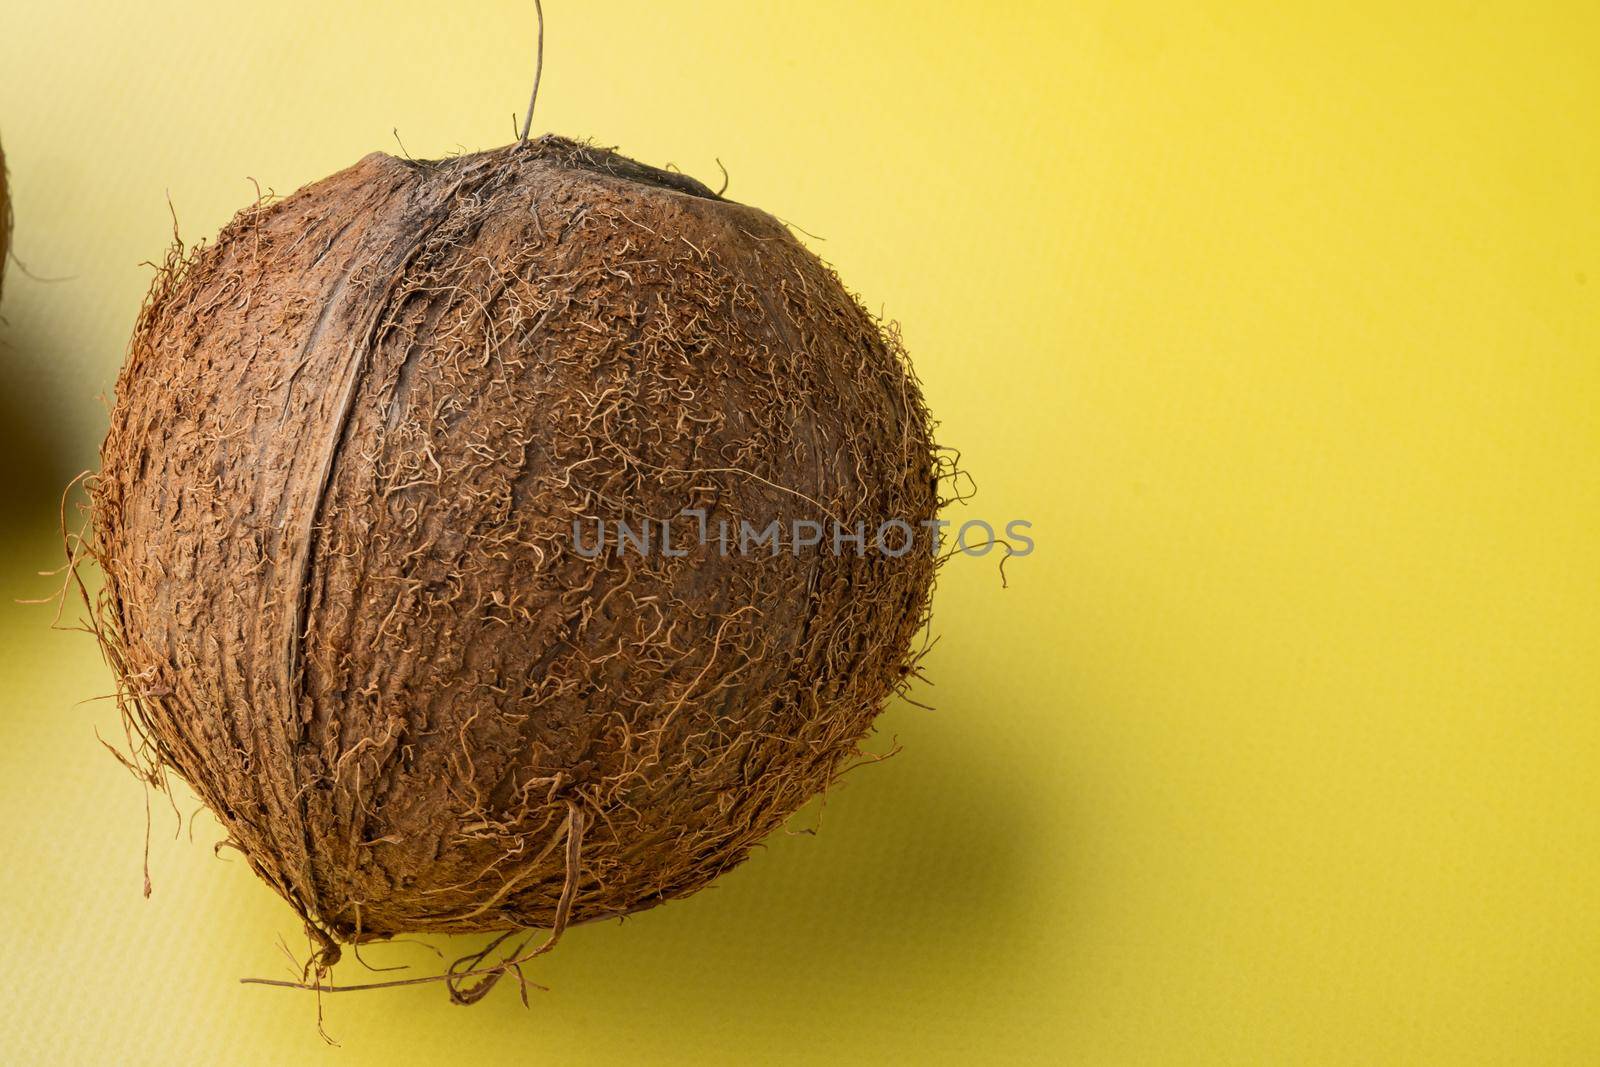 Freshly harvested coconut, on yellow textured summer background by Ilianesolenyi